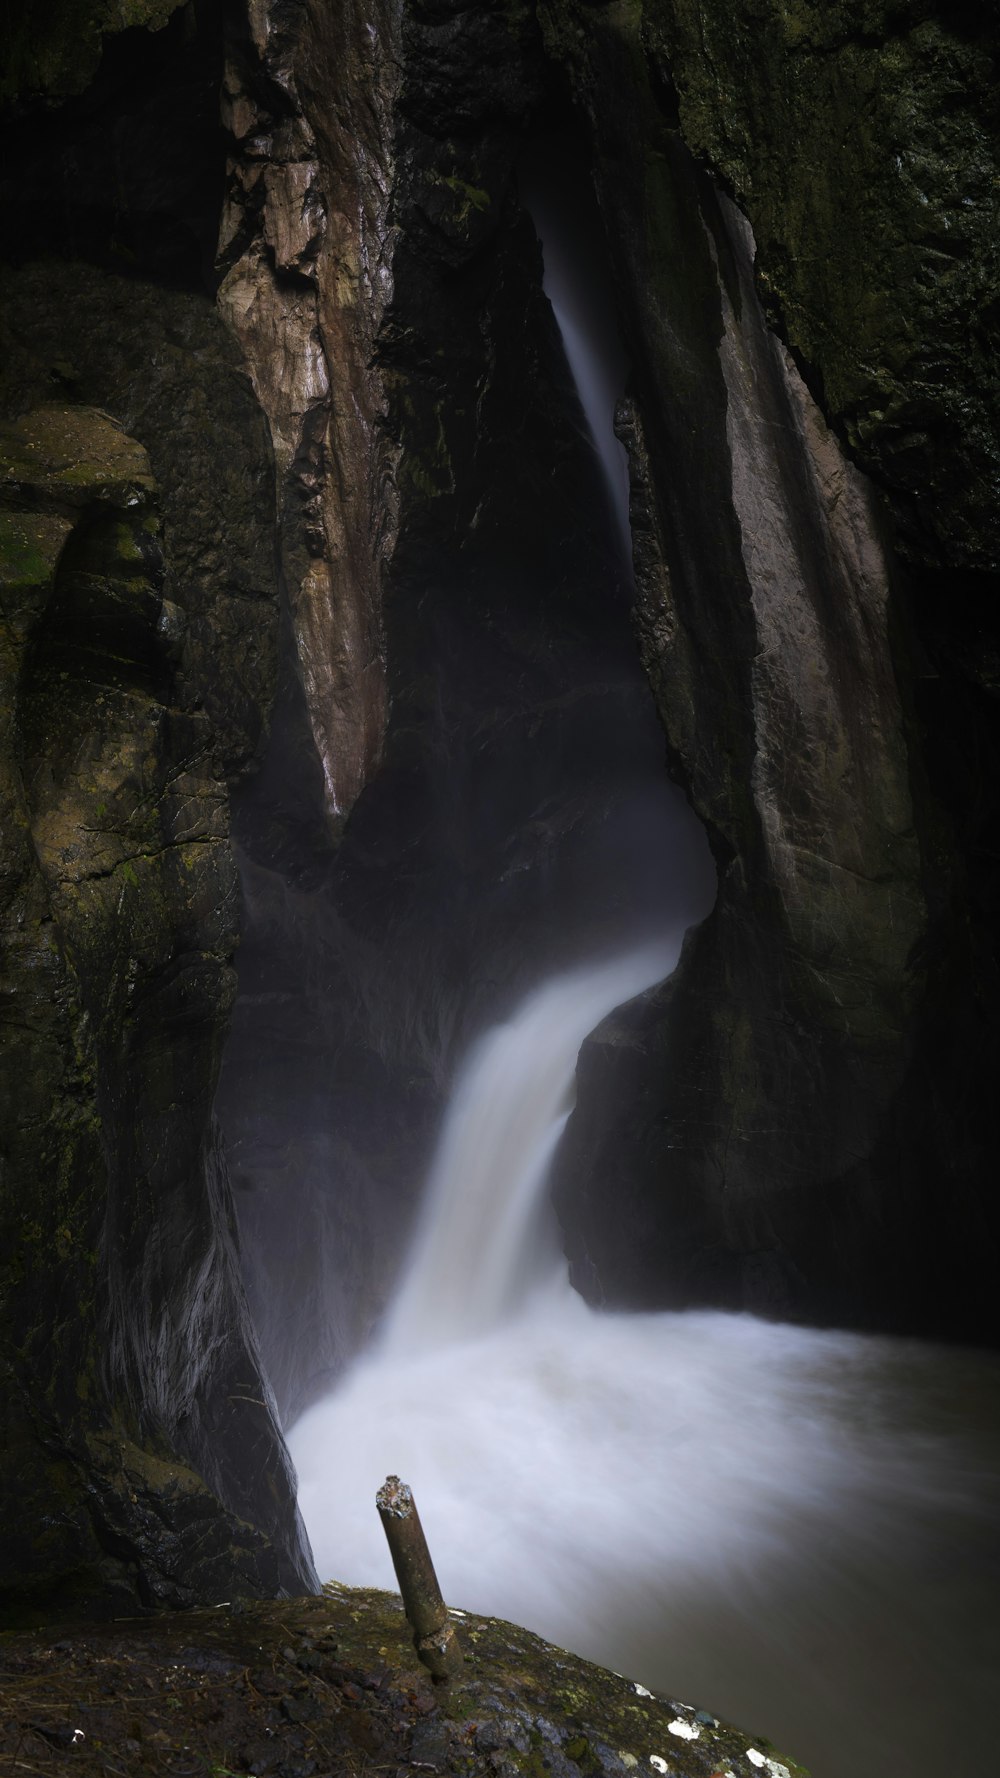 water falls between brown and green rock formation during daytime